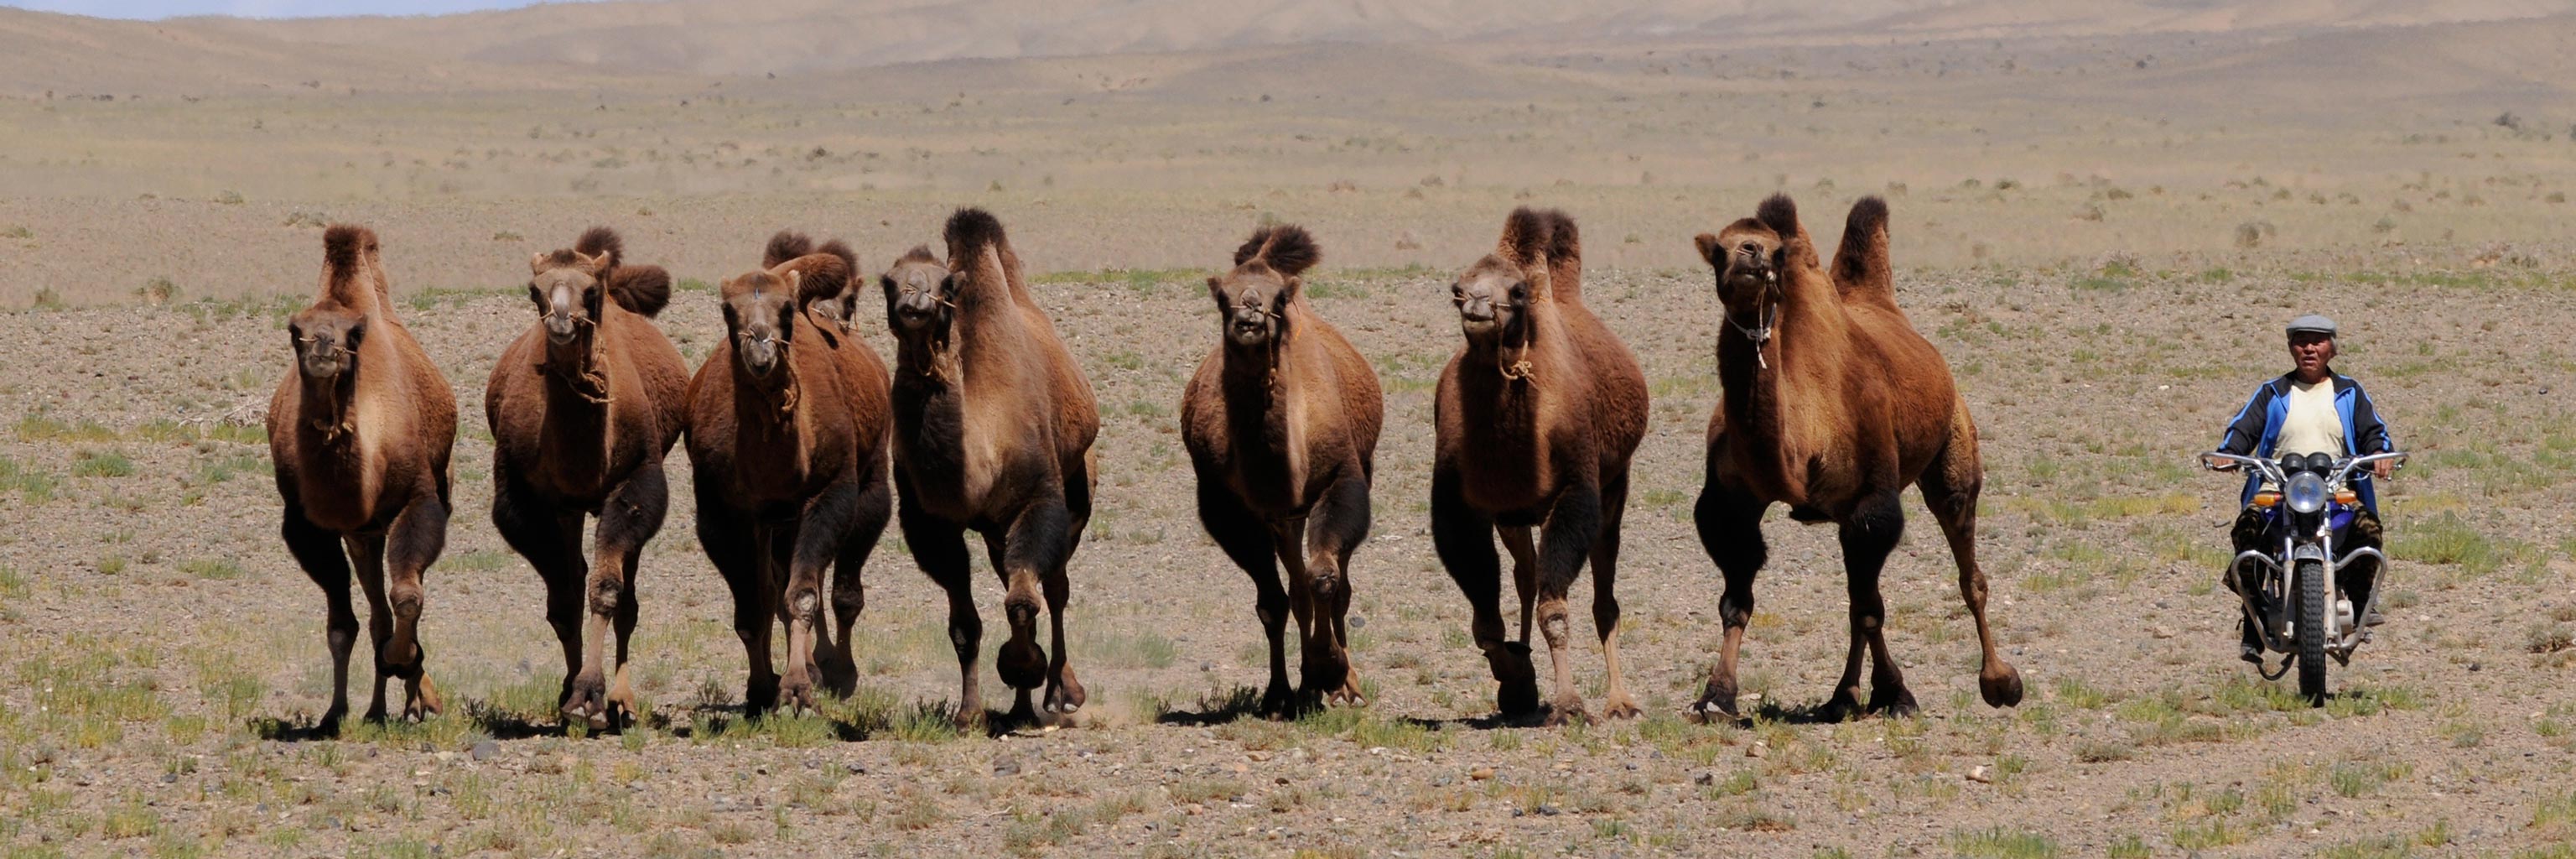 Row of Mongolian camels in a field